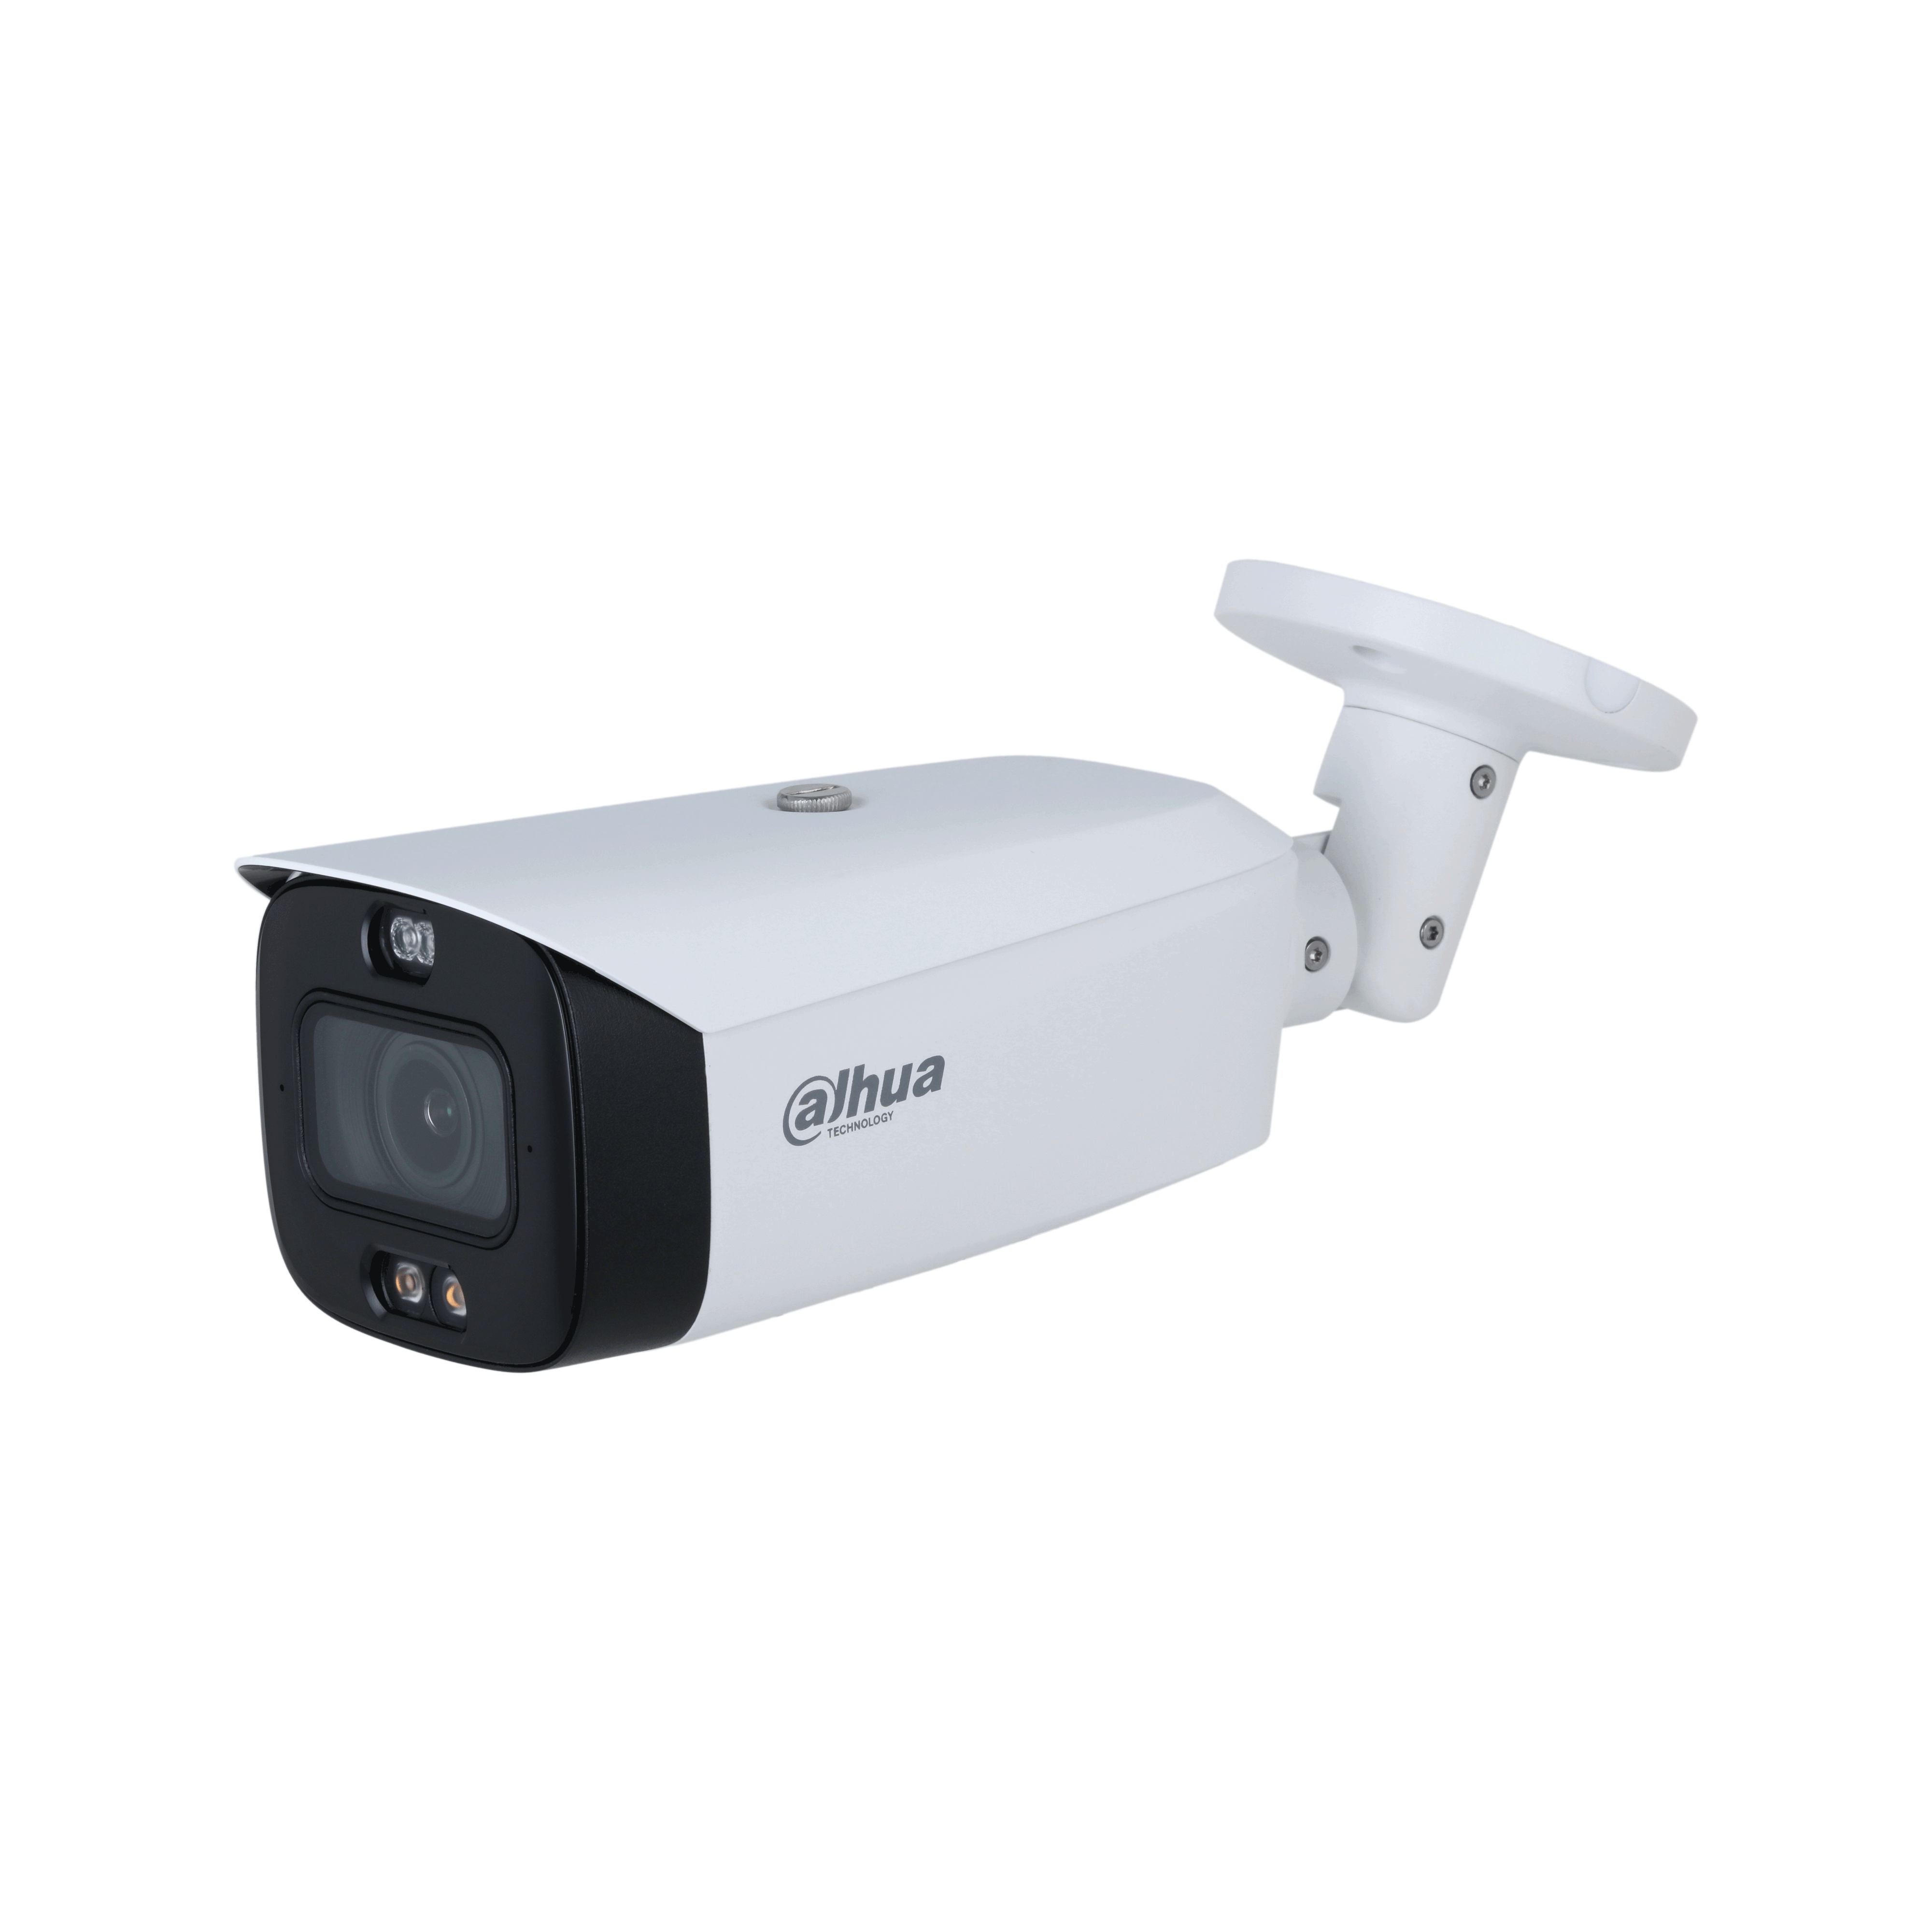 WIZSENSE SERIES IP CAMERA WHITE AI TIOC 5MP H.264/4+/5/5+ BULLET 120 WDR PLASTIC/METAL 2.7-13.5MM MOTORISED LENS 5X ZOOM FULL COLOUR IR+WHITE LED 50M POE IP67 BUILT IN MIC AUDIO IN AUDIO OUT 1 x ALARM IN 1 x ALARM OUT SUPPORT UP TO 256GB SD 12VDC